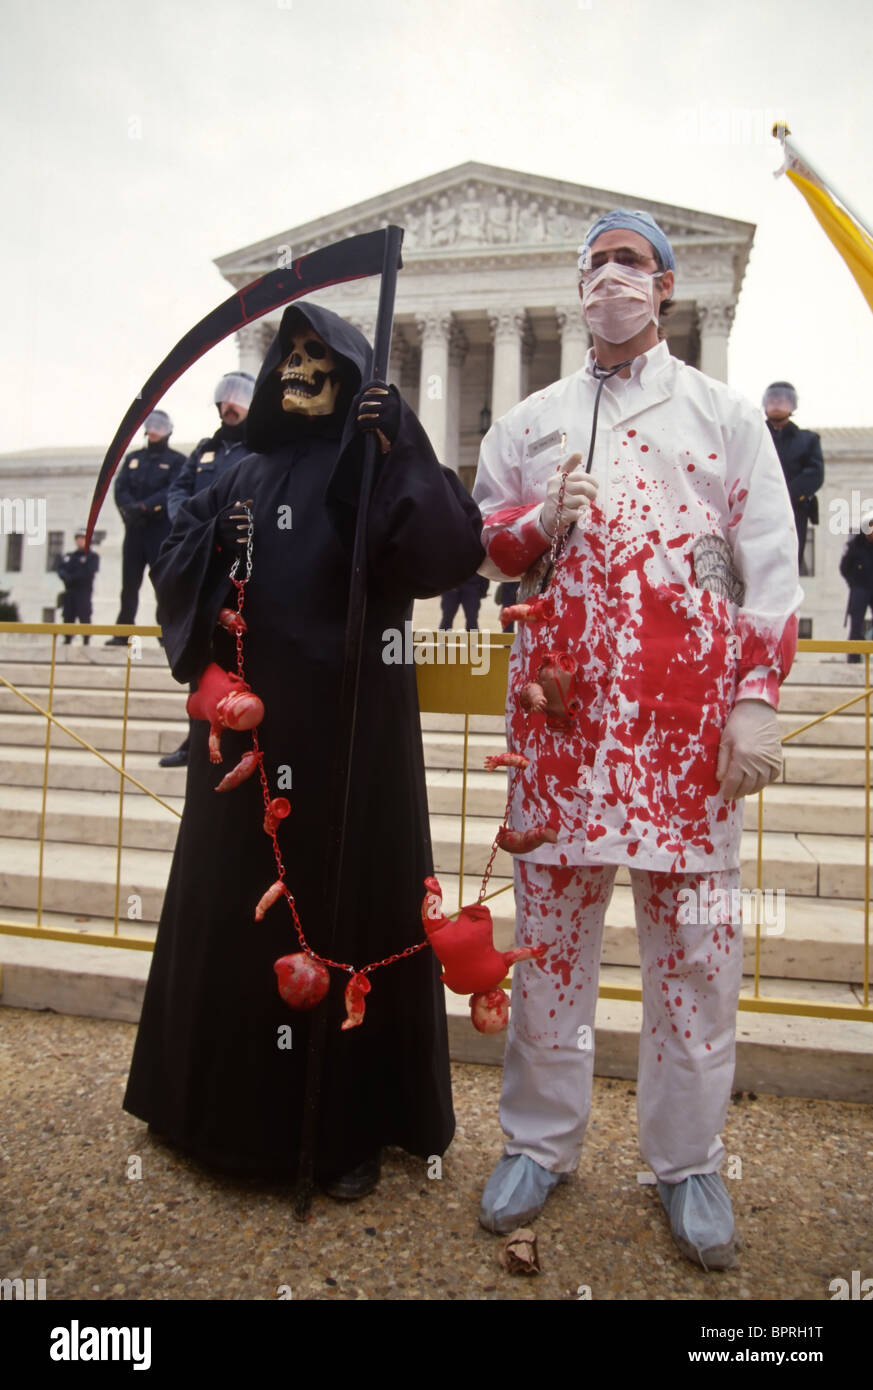 Anti-abortion protesters dressed as death in front of the US Supreme Court building Stock Photo